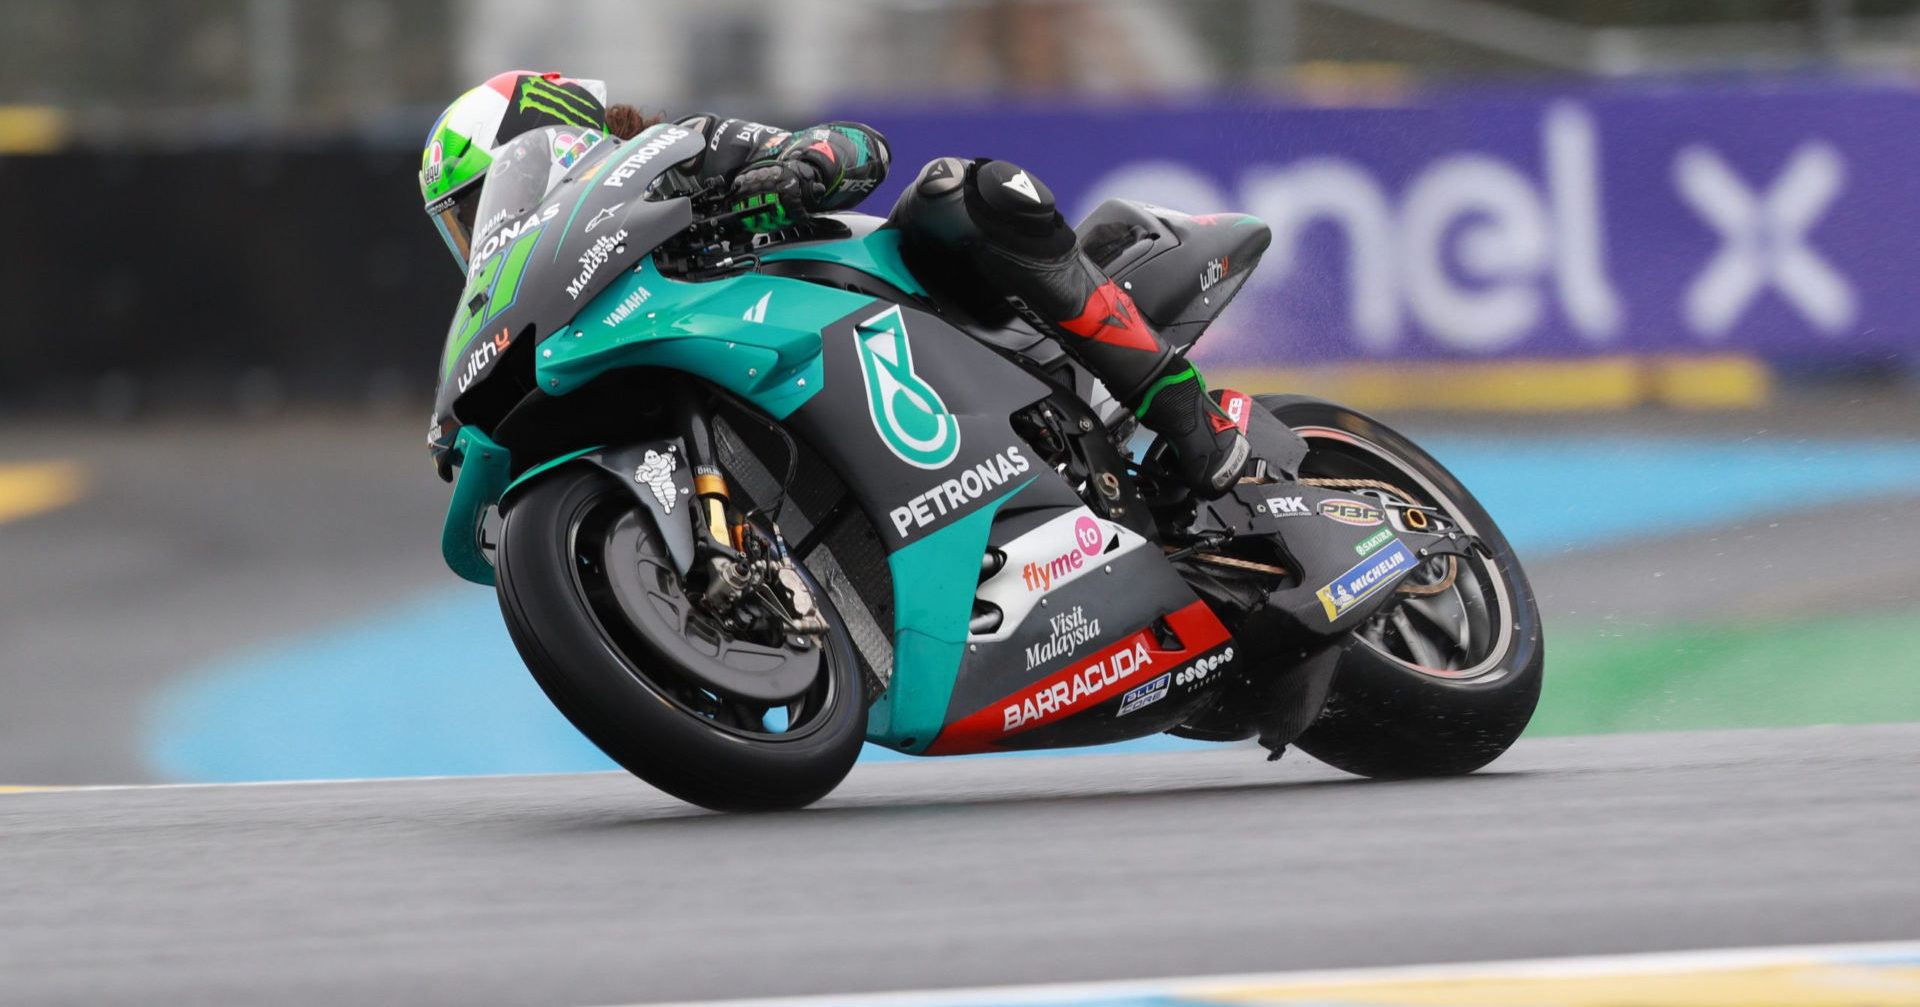 Franco Morbidelli (21) riding in cold and wet conditions at Le Mans. Photo courtesy PETRONAS Yamaha SRT.